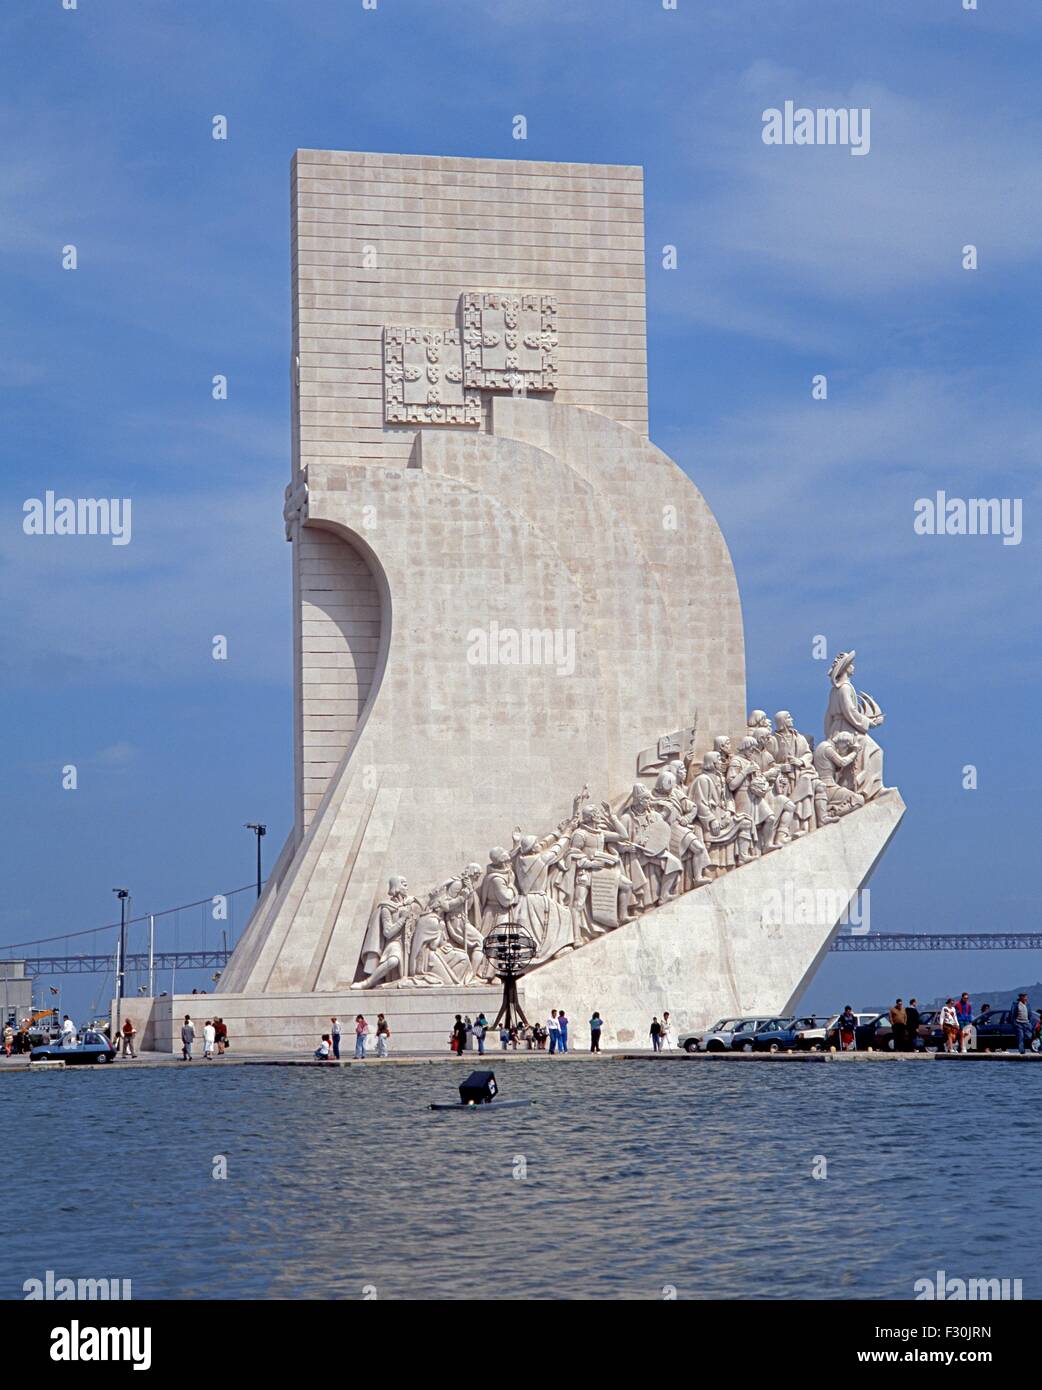 Monument to the Discoveries along the Tagus River, Lisbon, Portugal, Europe Stock Photo